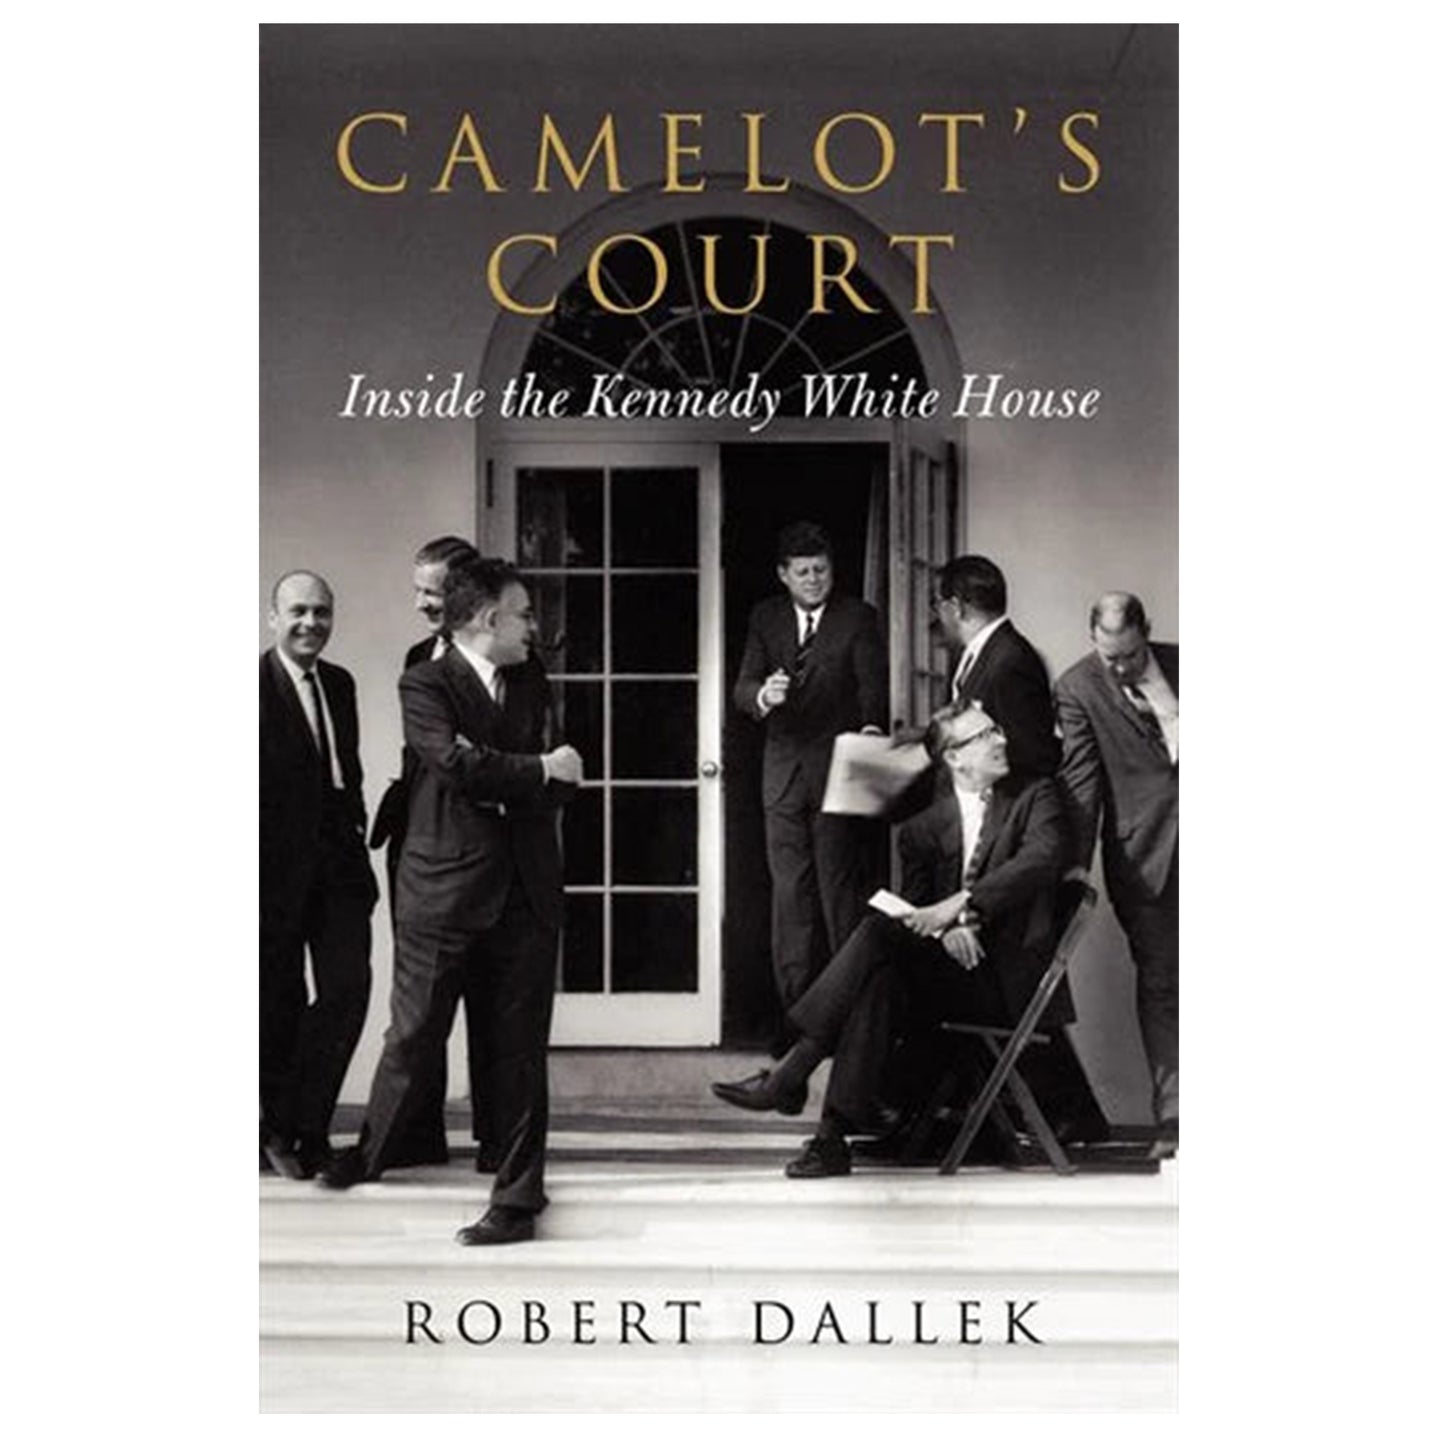 Camelot's Court- Inside the Kennedy White House